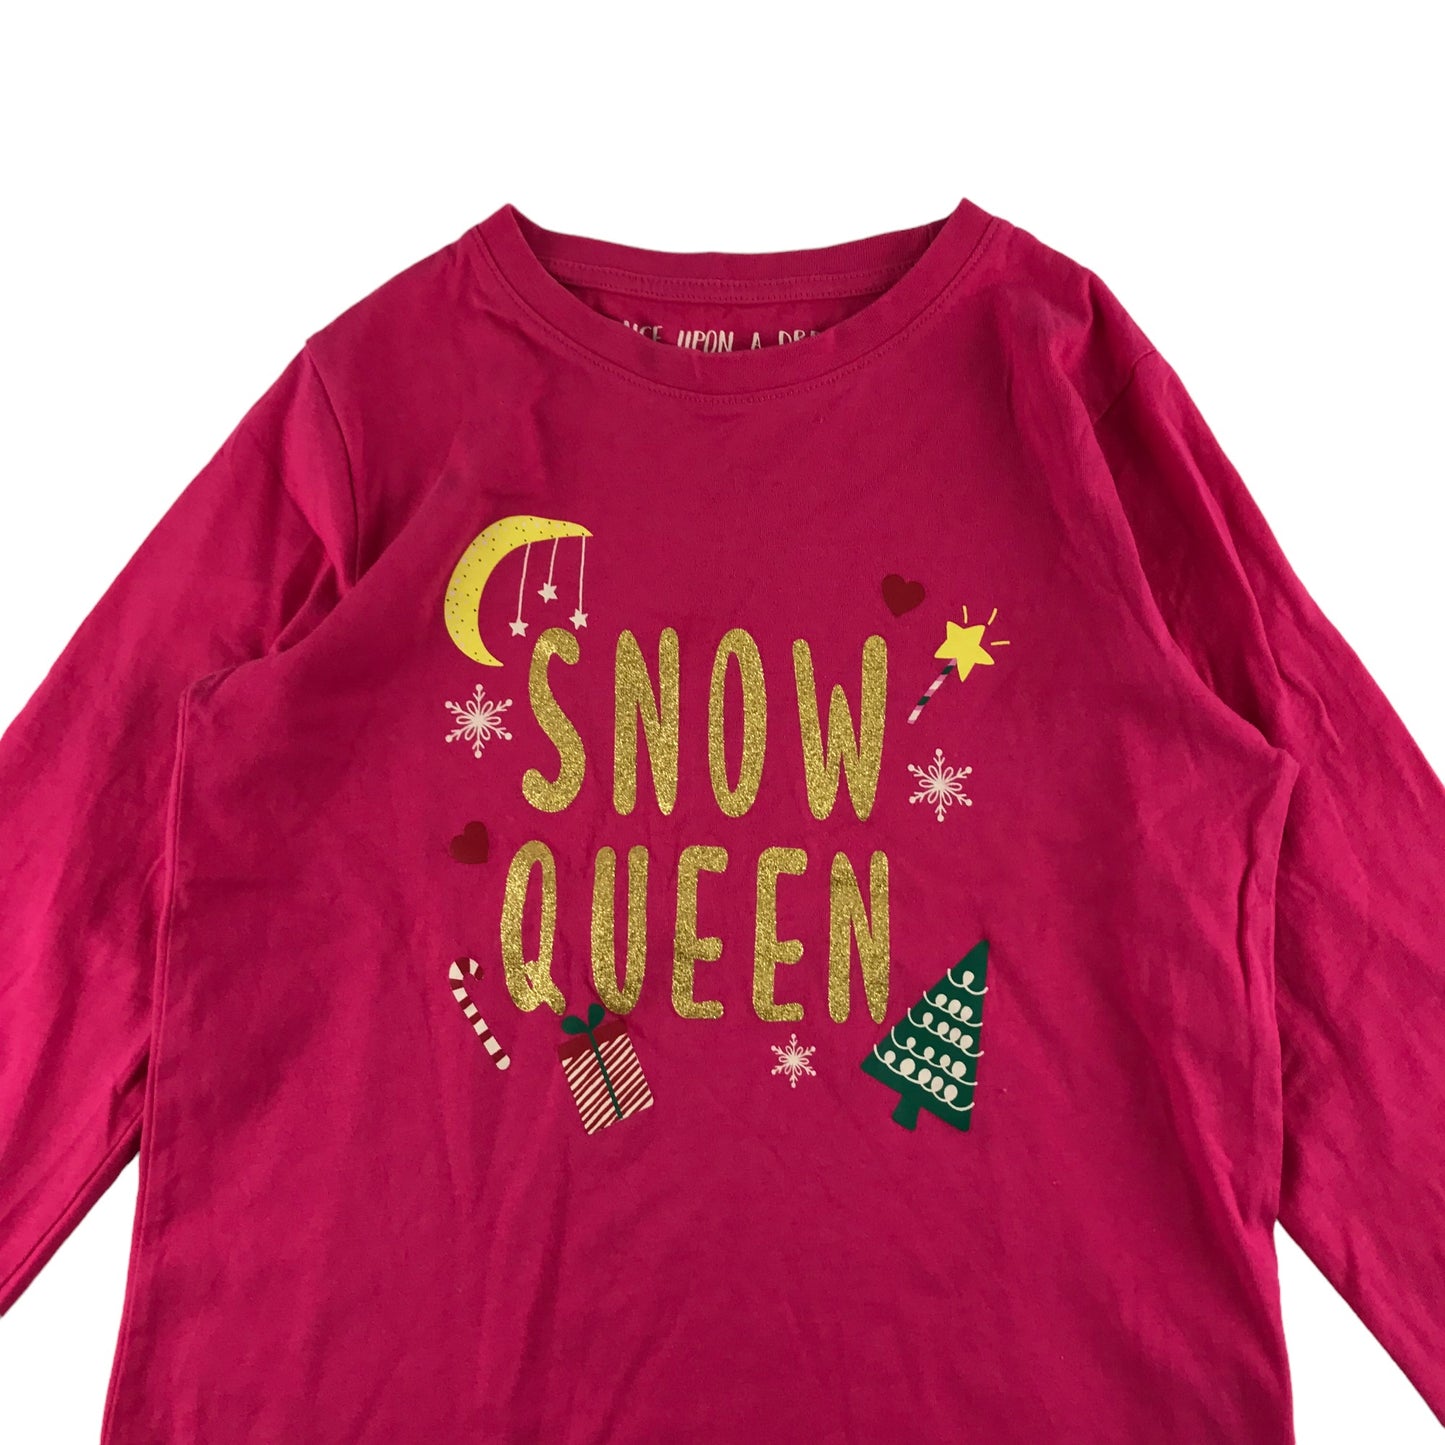 Very Christmas T-Shirt Age 9 Pink Snow Queen Graphic Long Sleeve